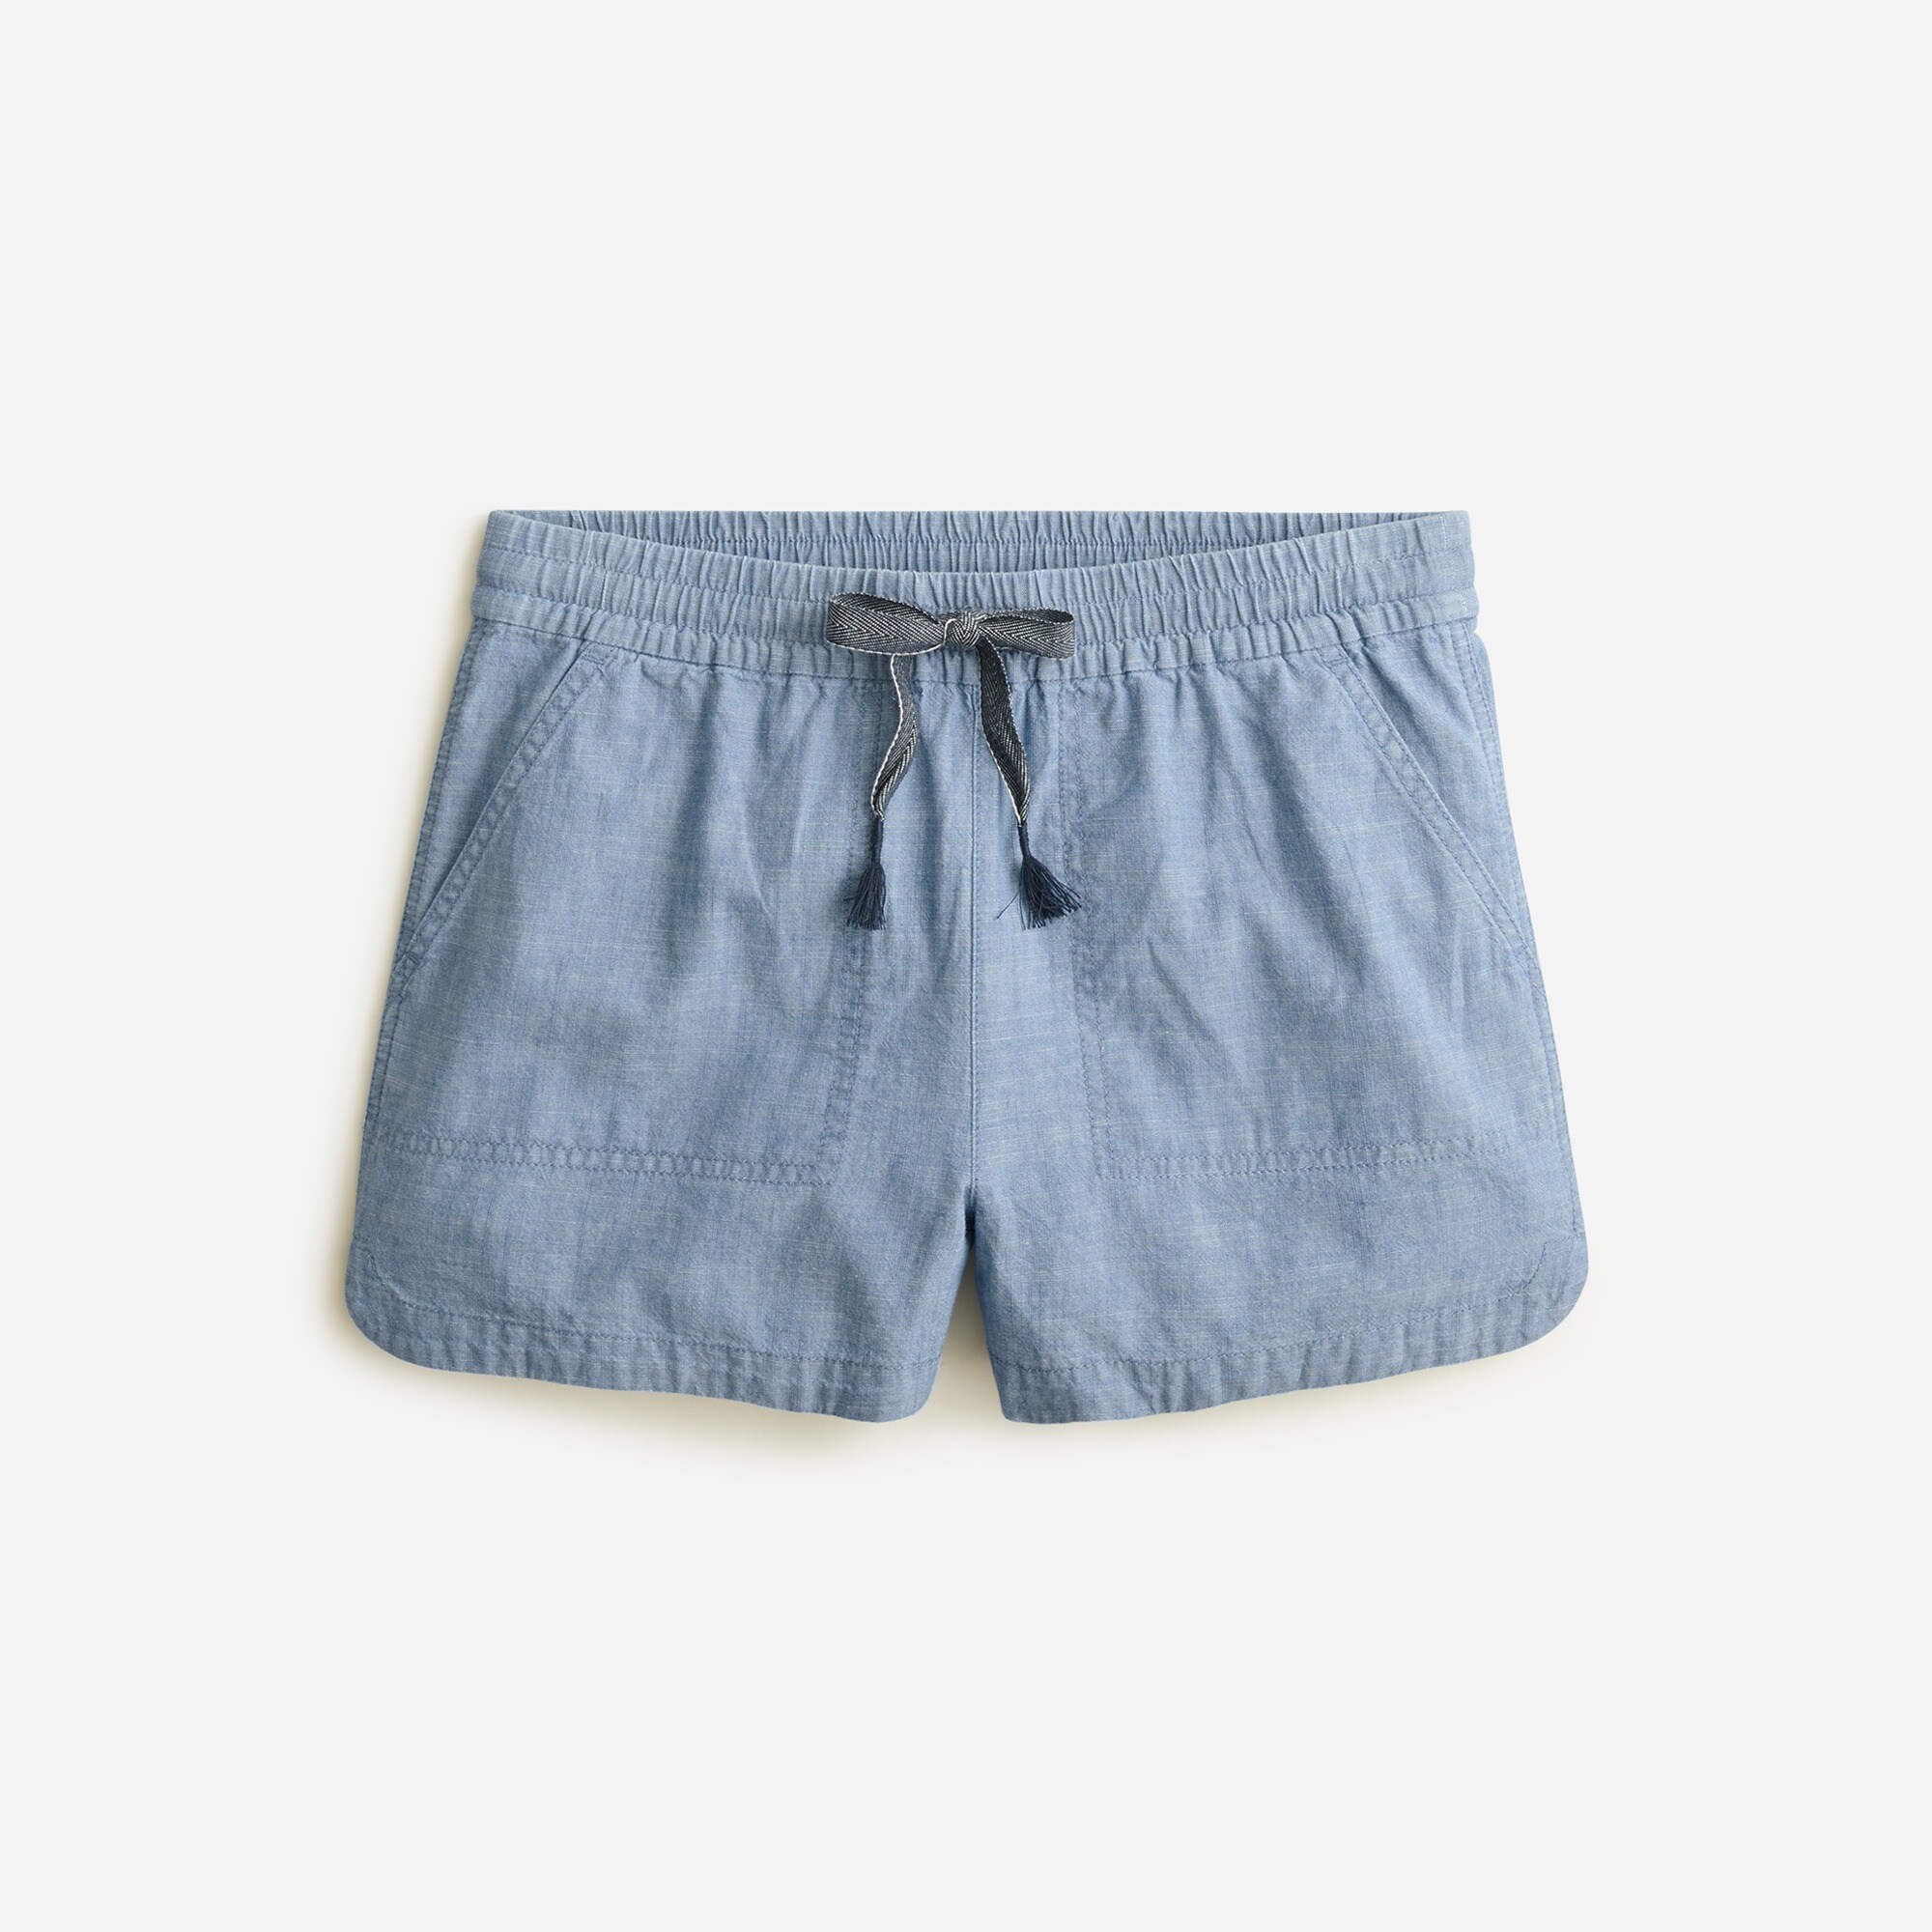  New seaside short in chambray